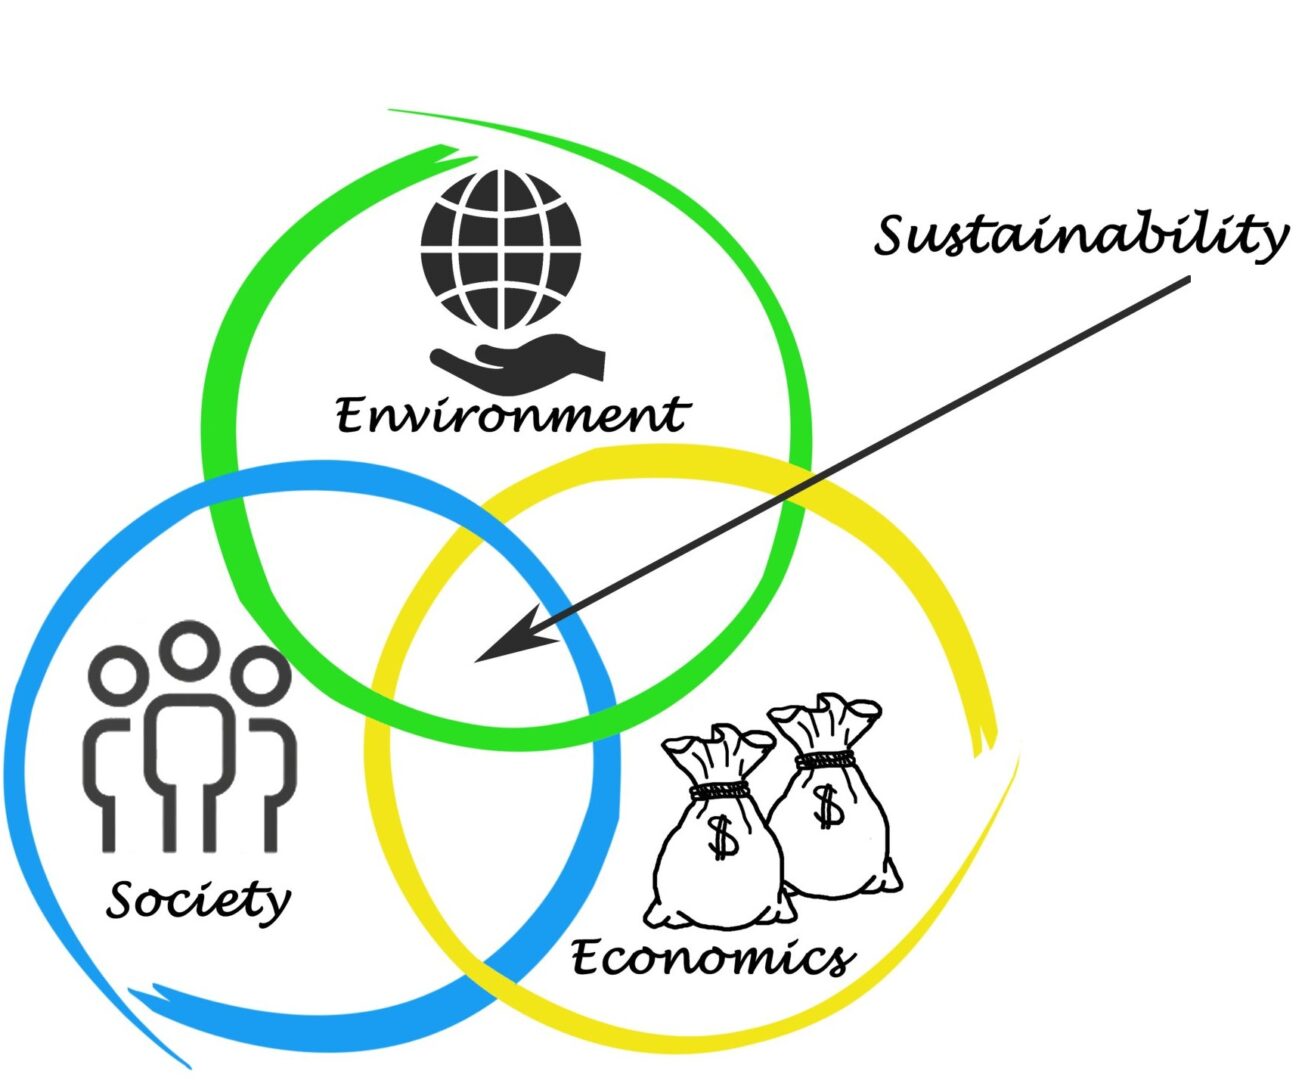 Sustainability risk assesment